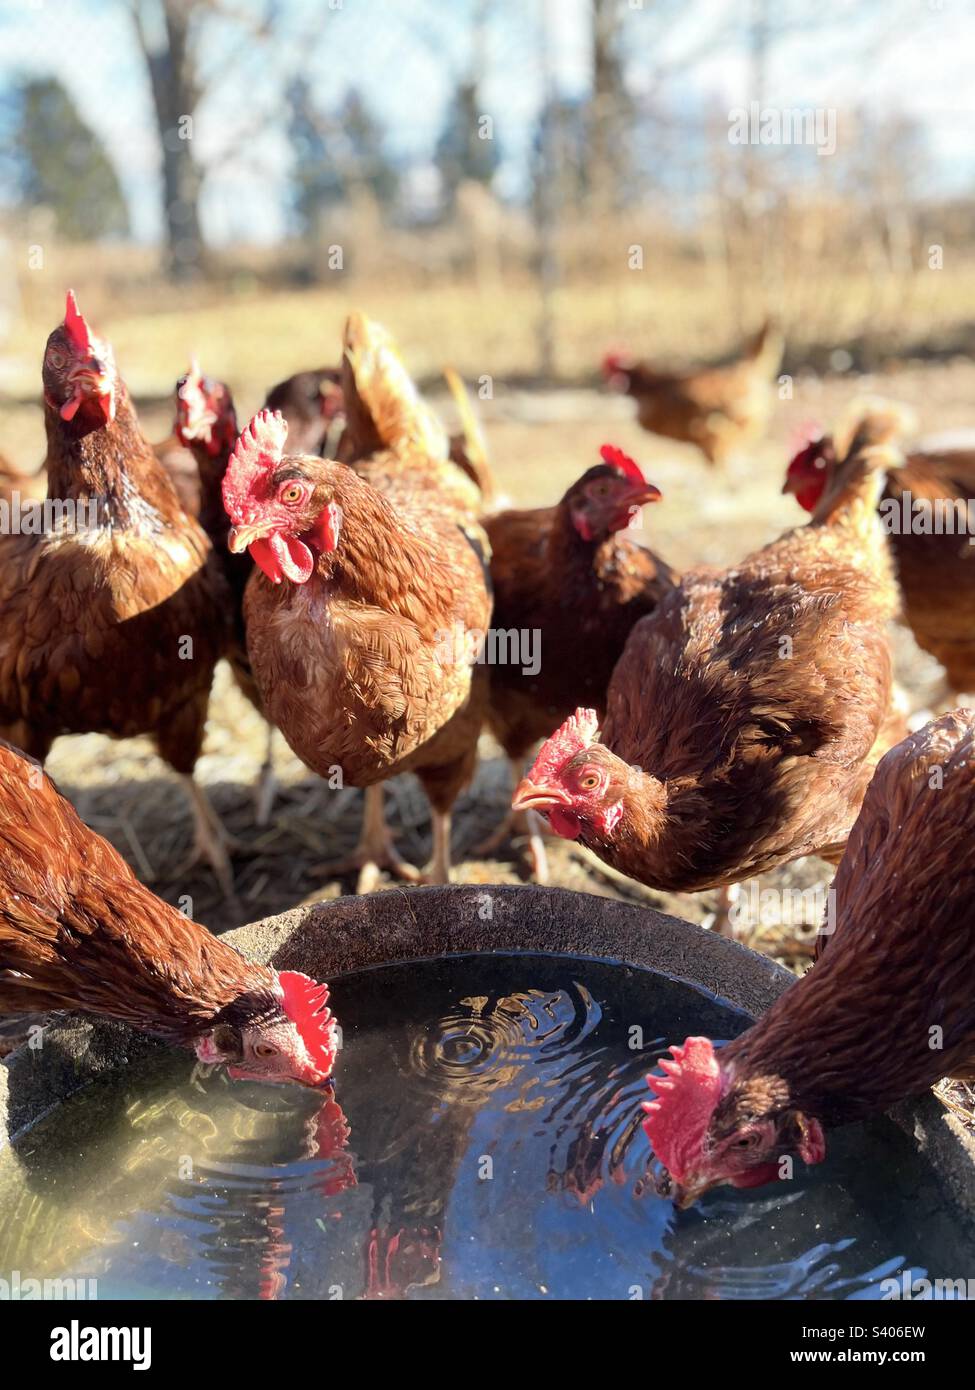 Chickens drinking water Stock Photo